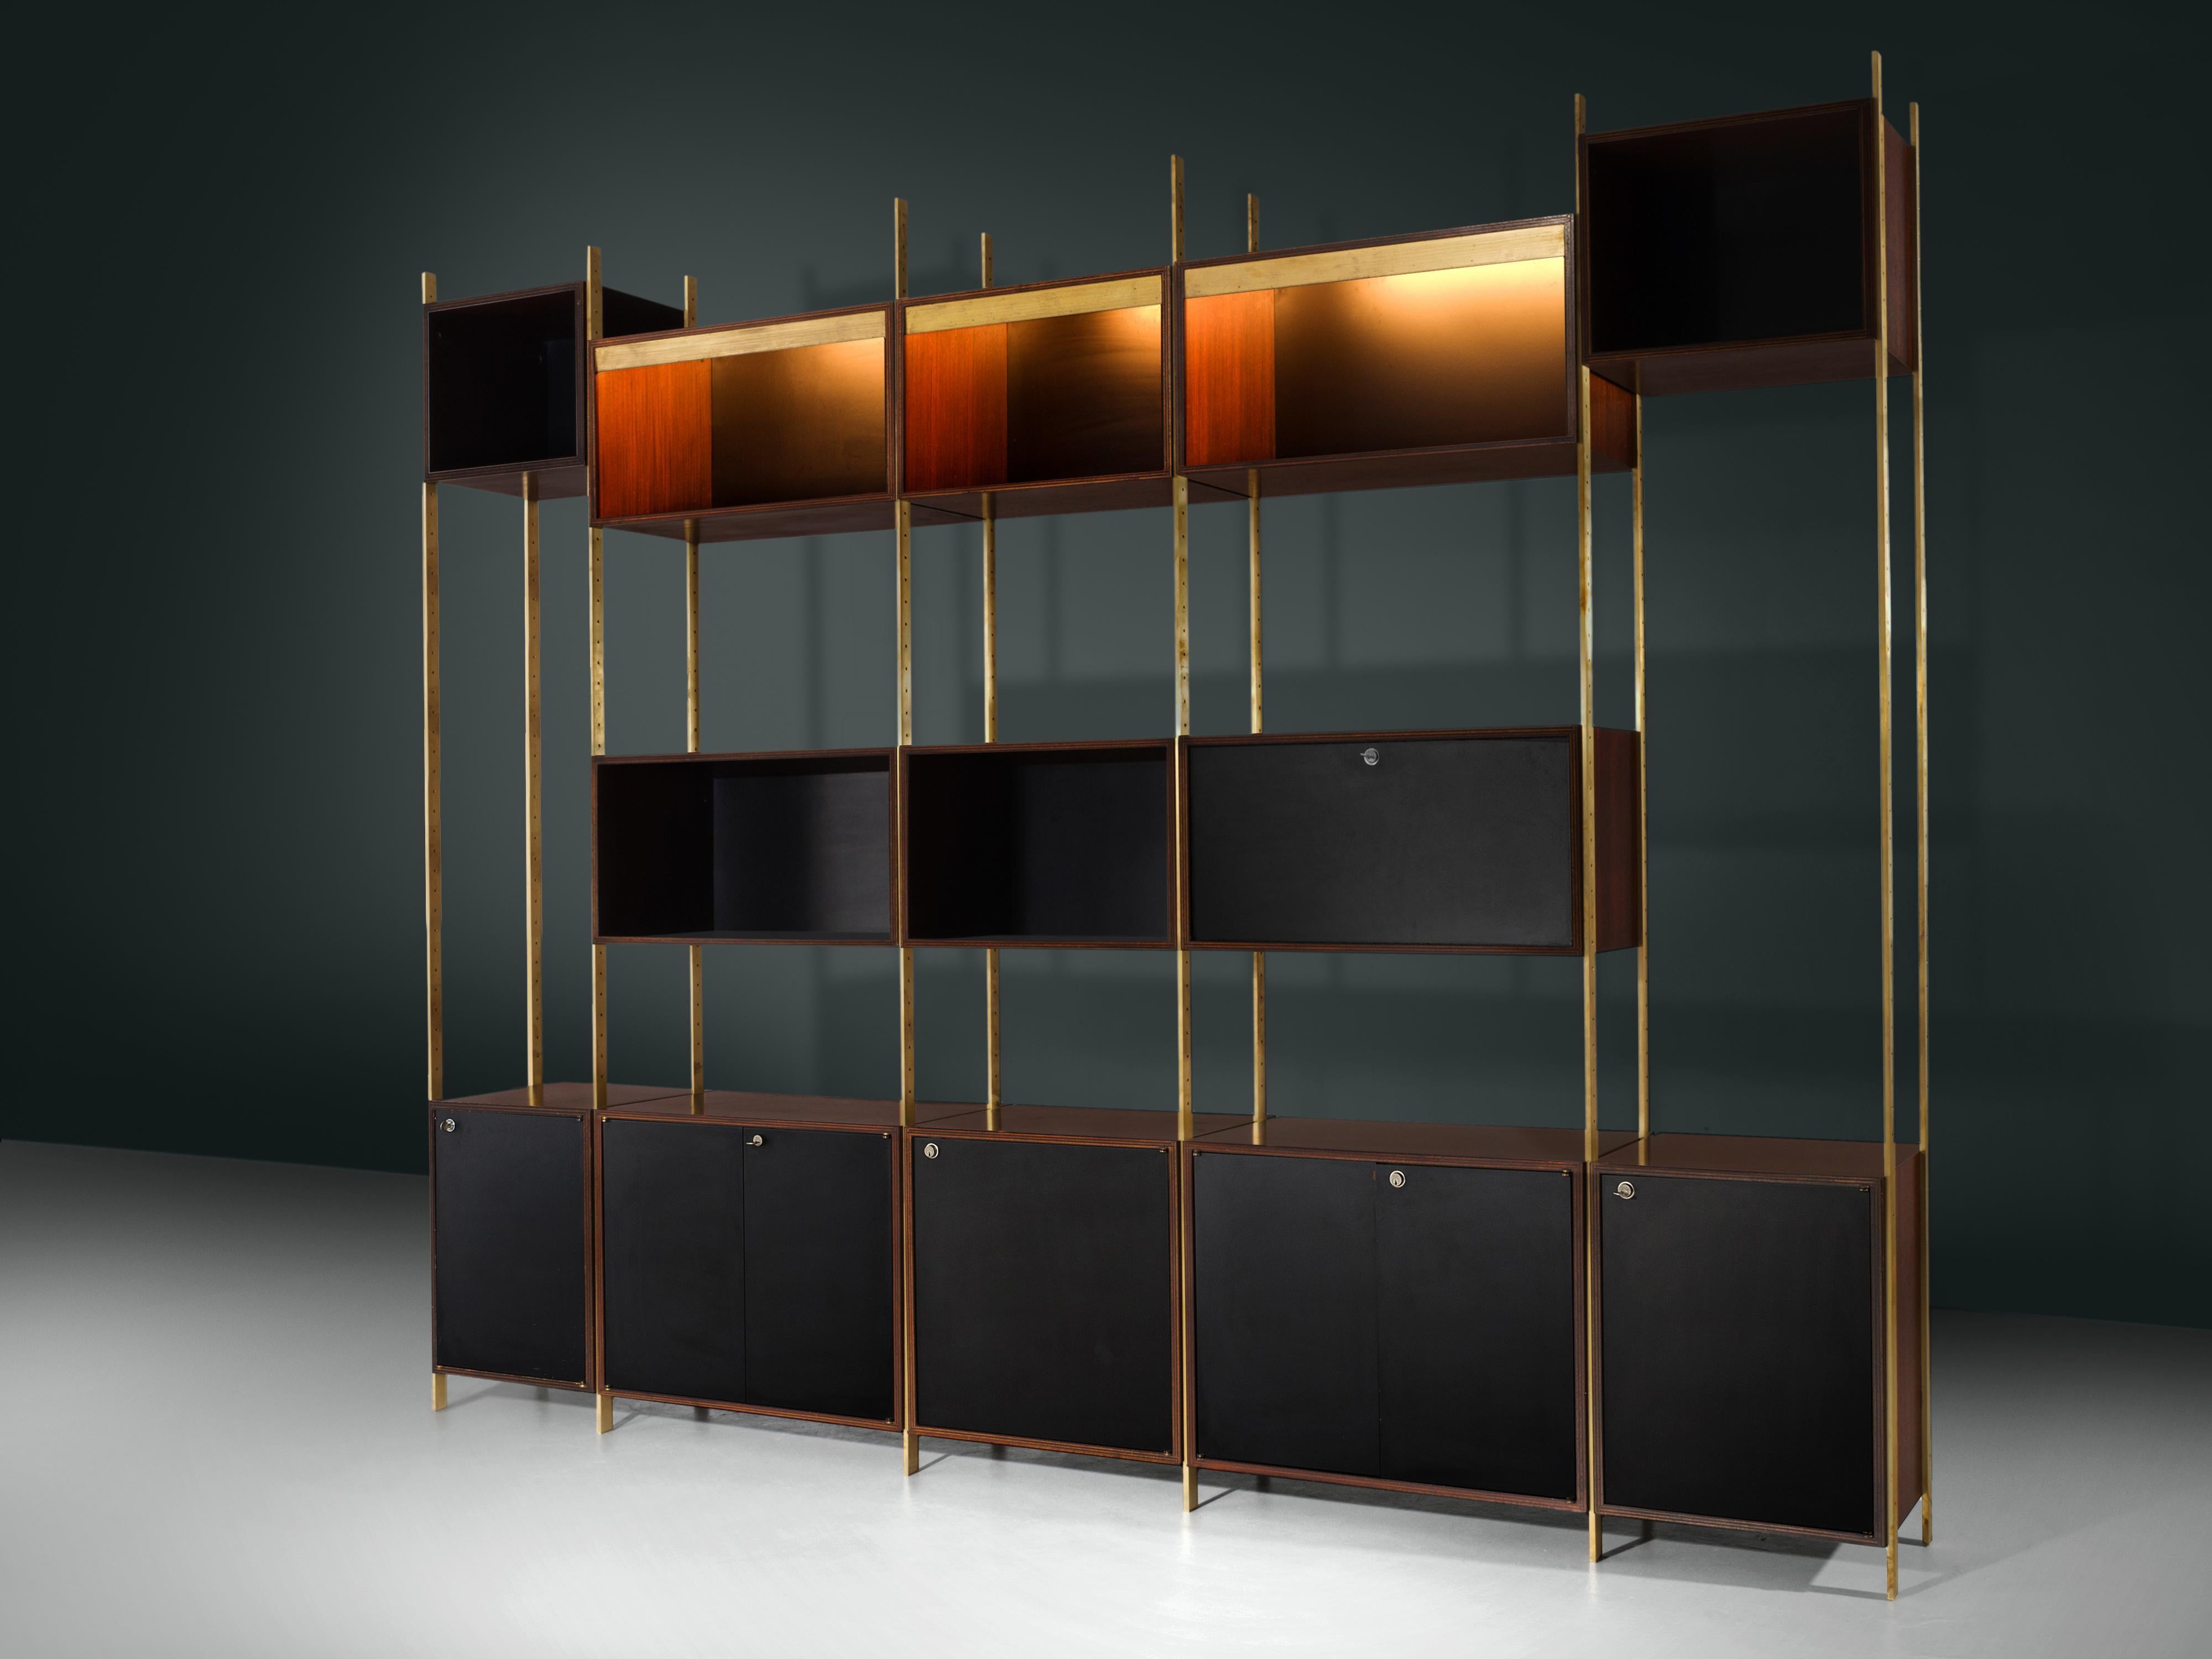 Jules Wabbes for Mobilier Universel, bookcase, in brass and wood, Belgium, 1960s
 
Rare wall unit designed by master furniture-maker Jules Wabbes. This exceptional piece could be used as a bookcase in front of a wall or a room divider. The stunning